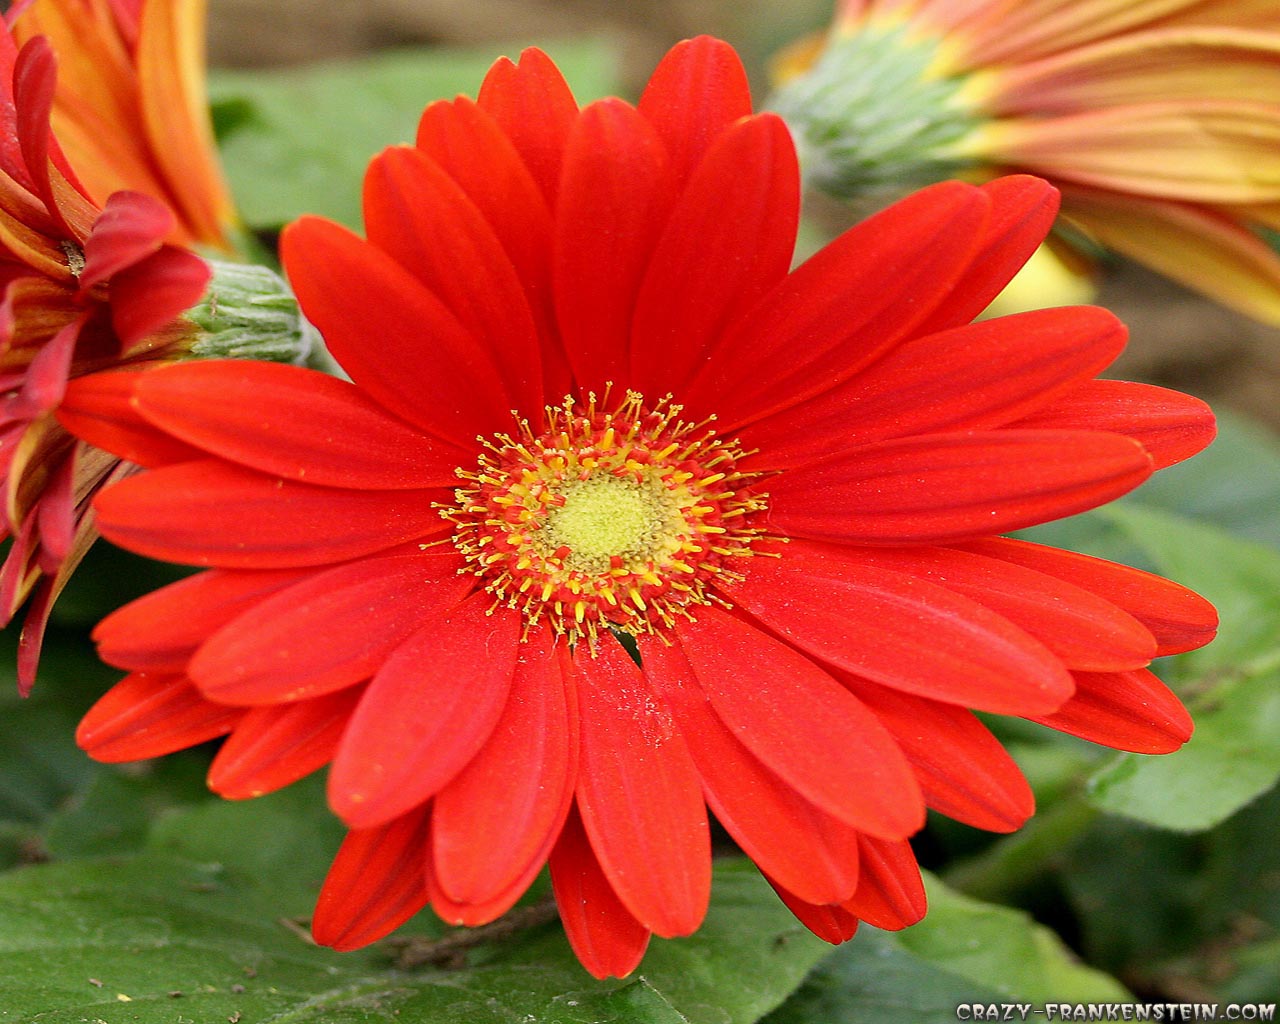 Flowers Images Large Size - HD Wallpaper 